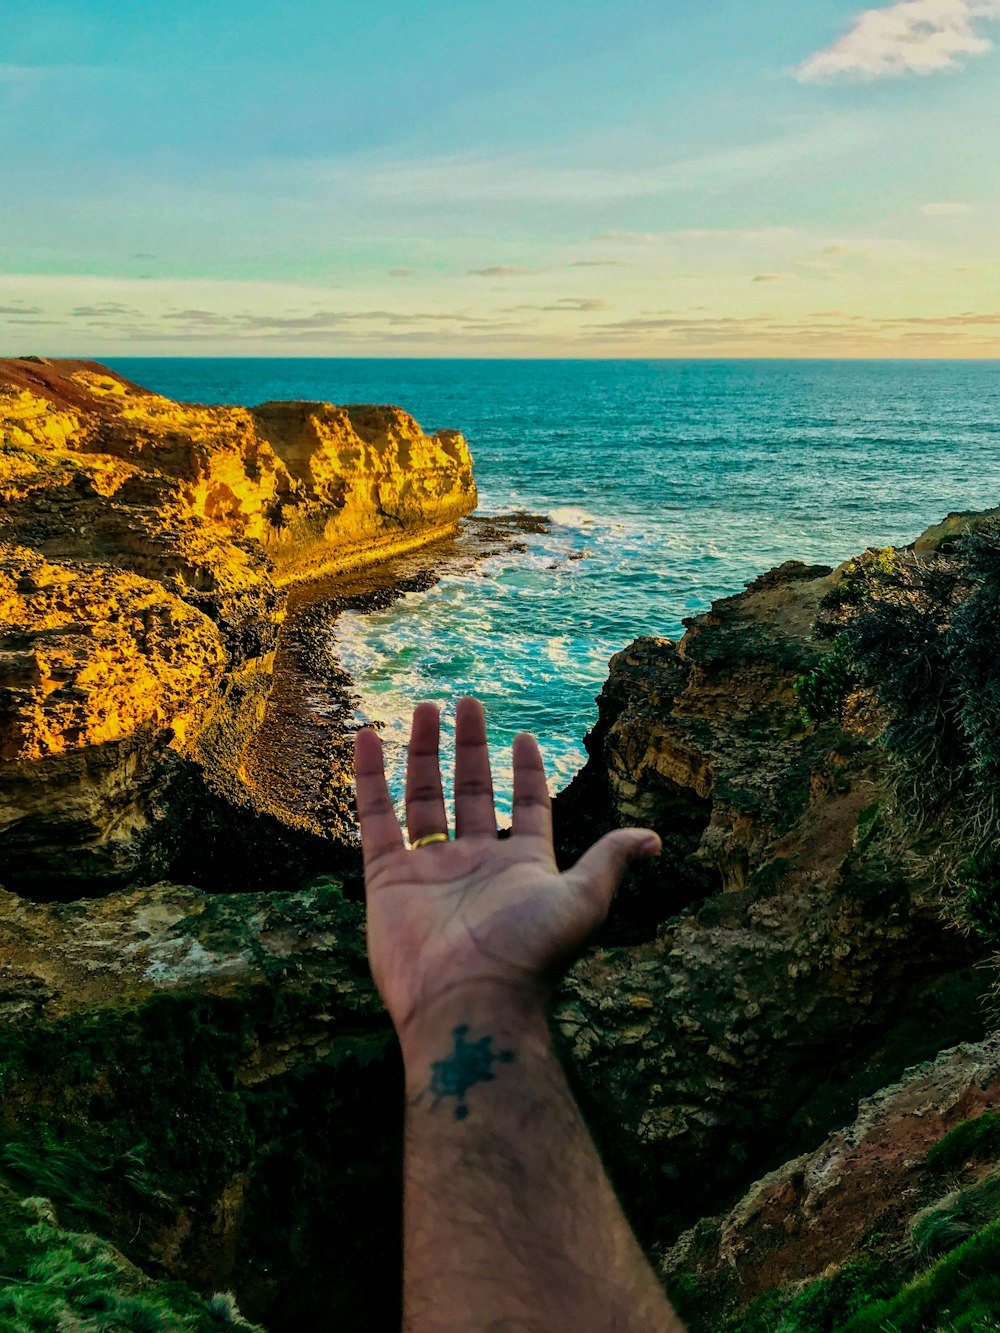 persons hand on brown rock formation near body of water during daytime